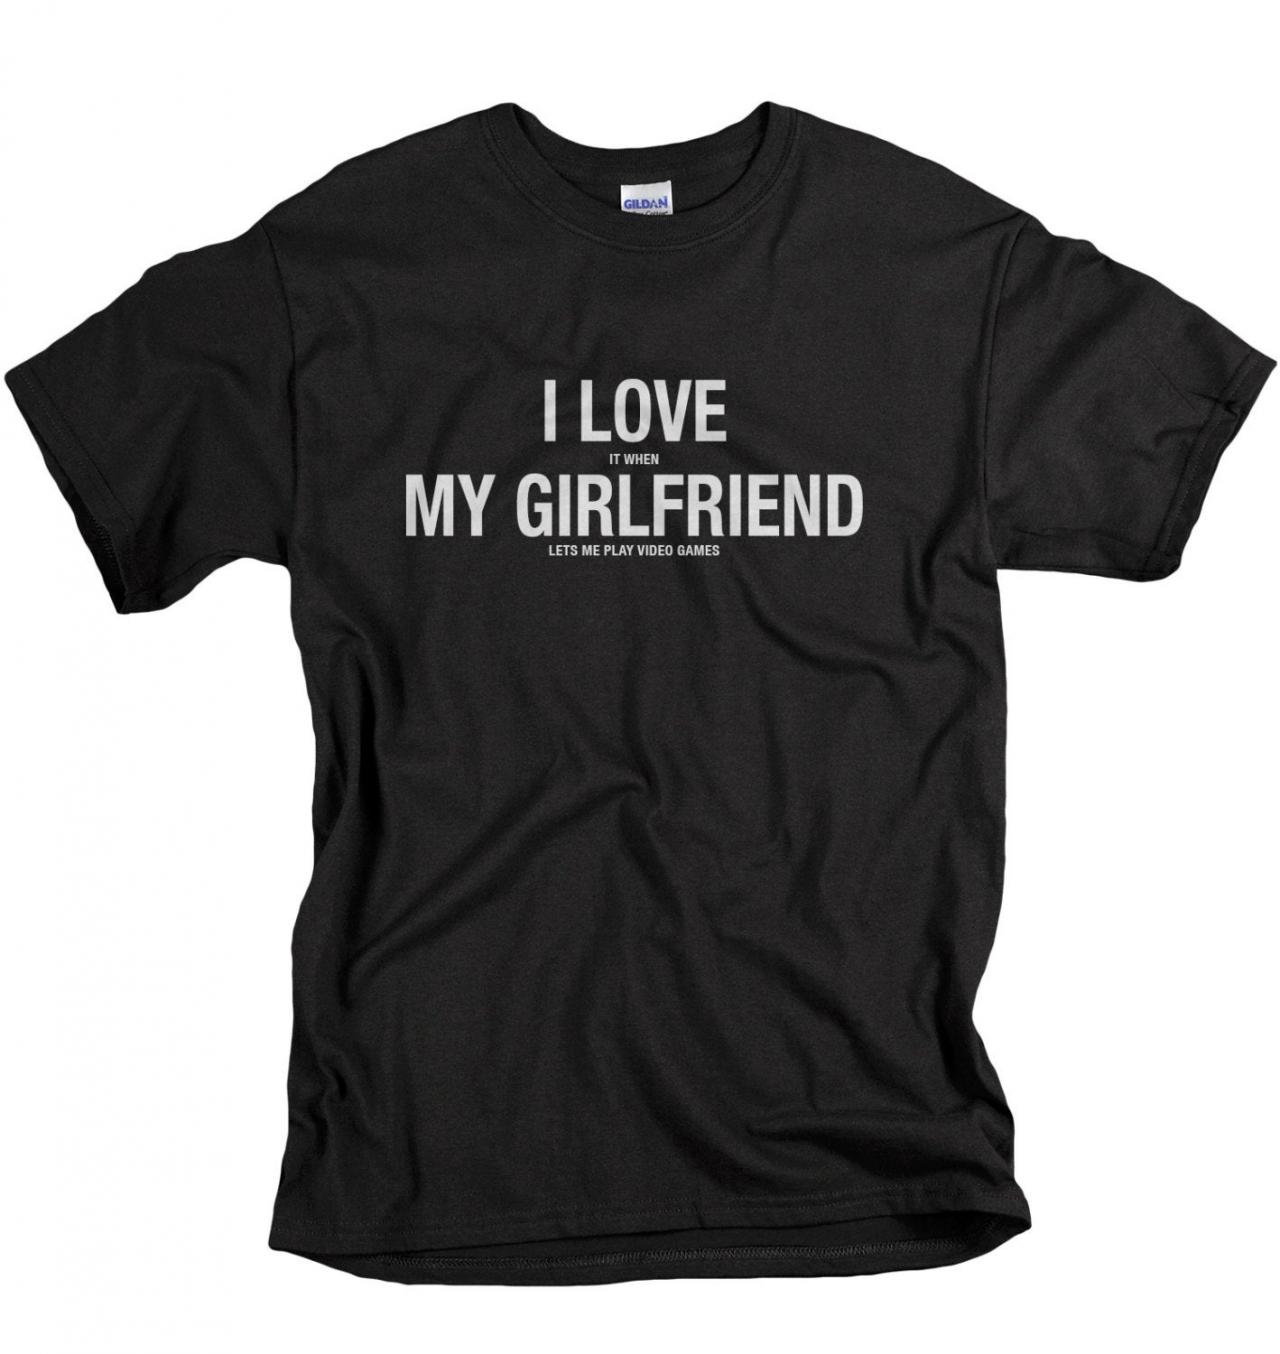 Christmas Gifts For Boyfriend - Video Game T Shirt For Him - Boyfriend Gifts From Girlfriend - Funny Tshirts